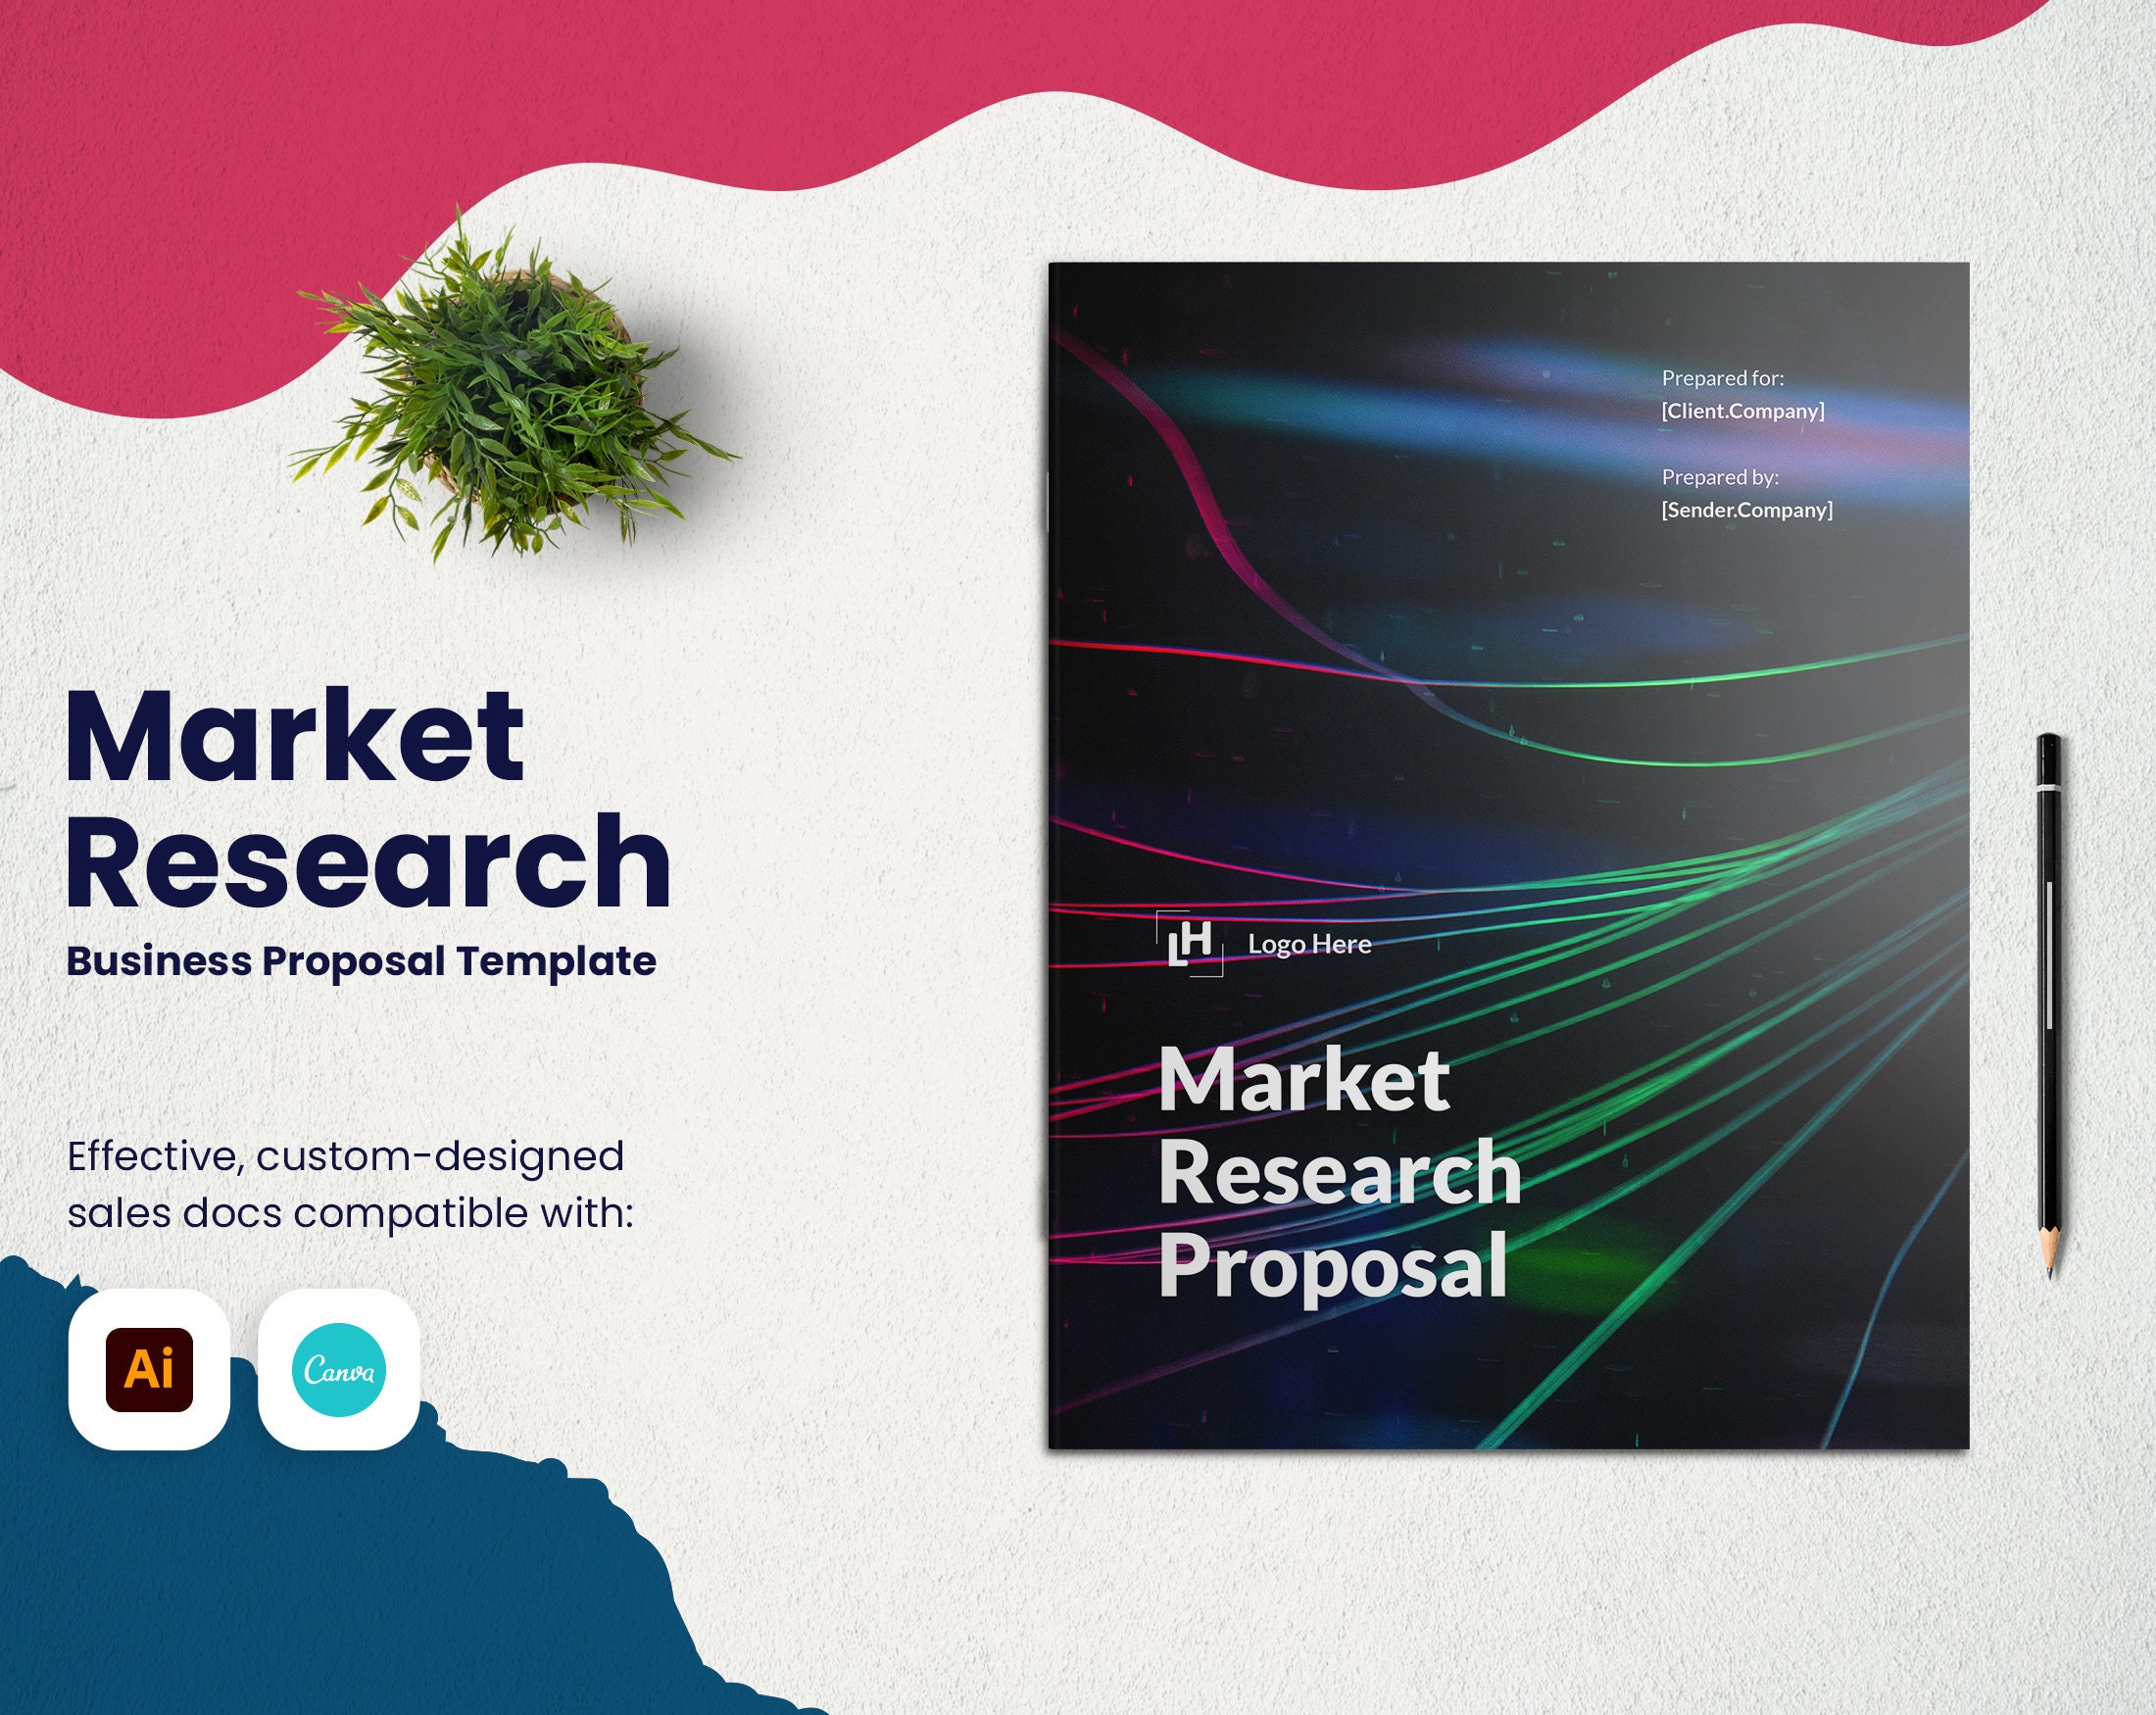 the market research proposal